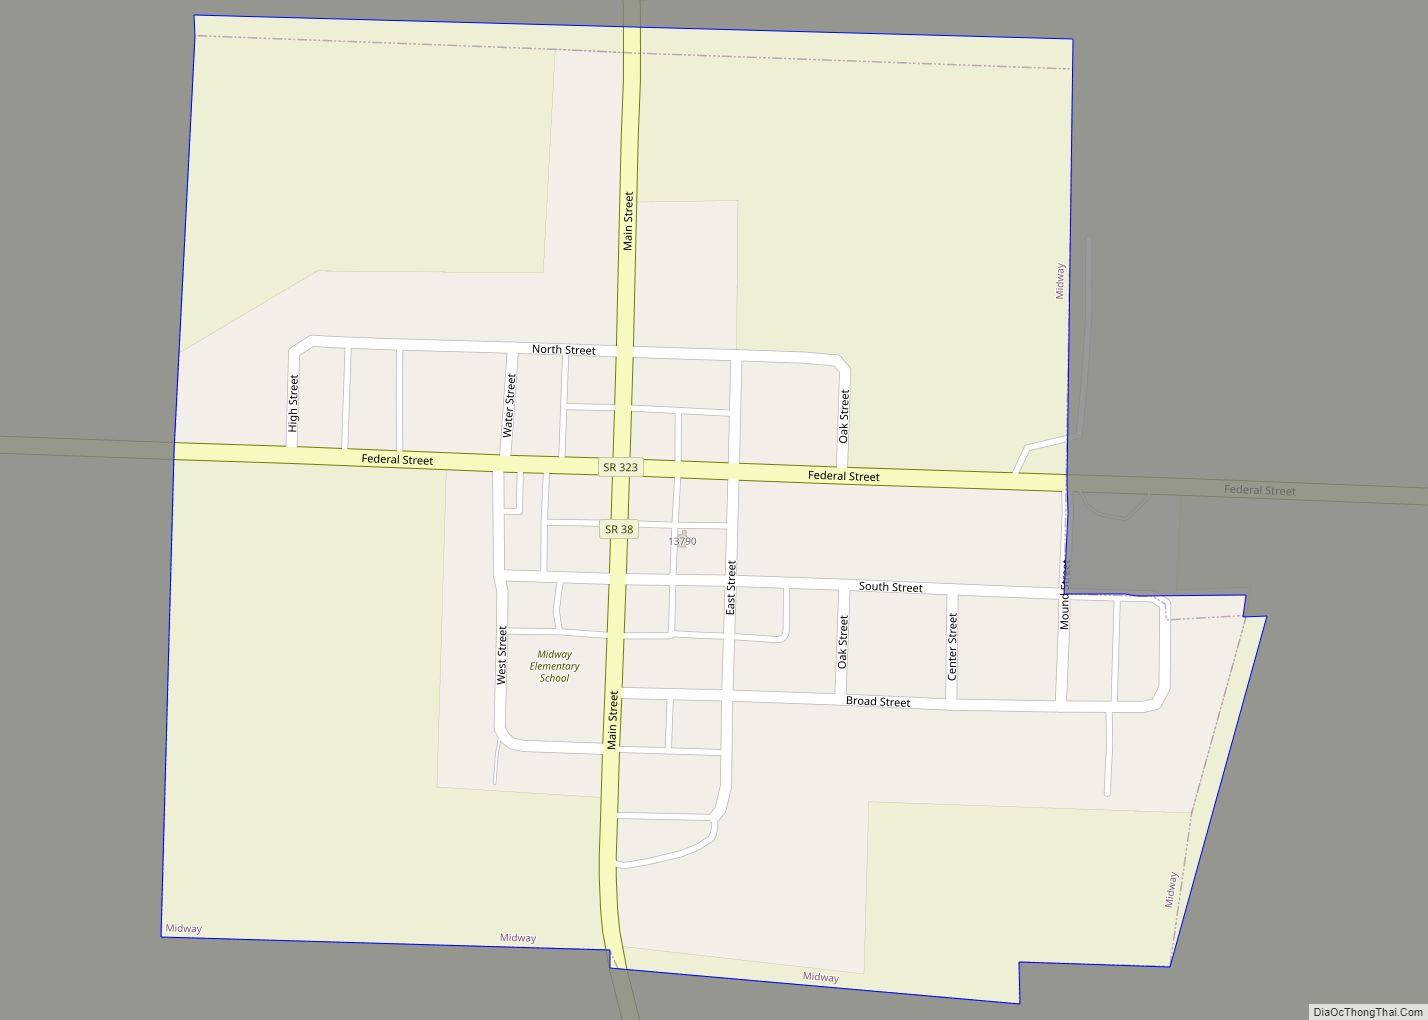 Map of Midway village, Ohio